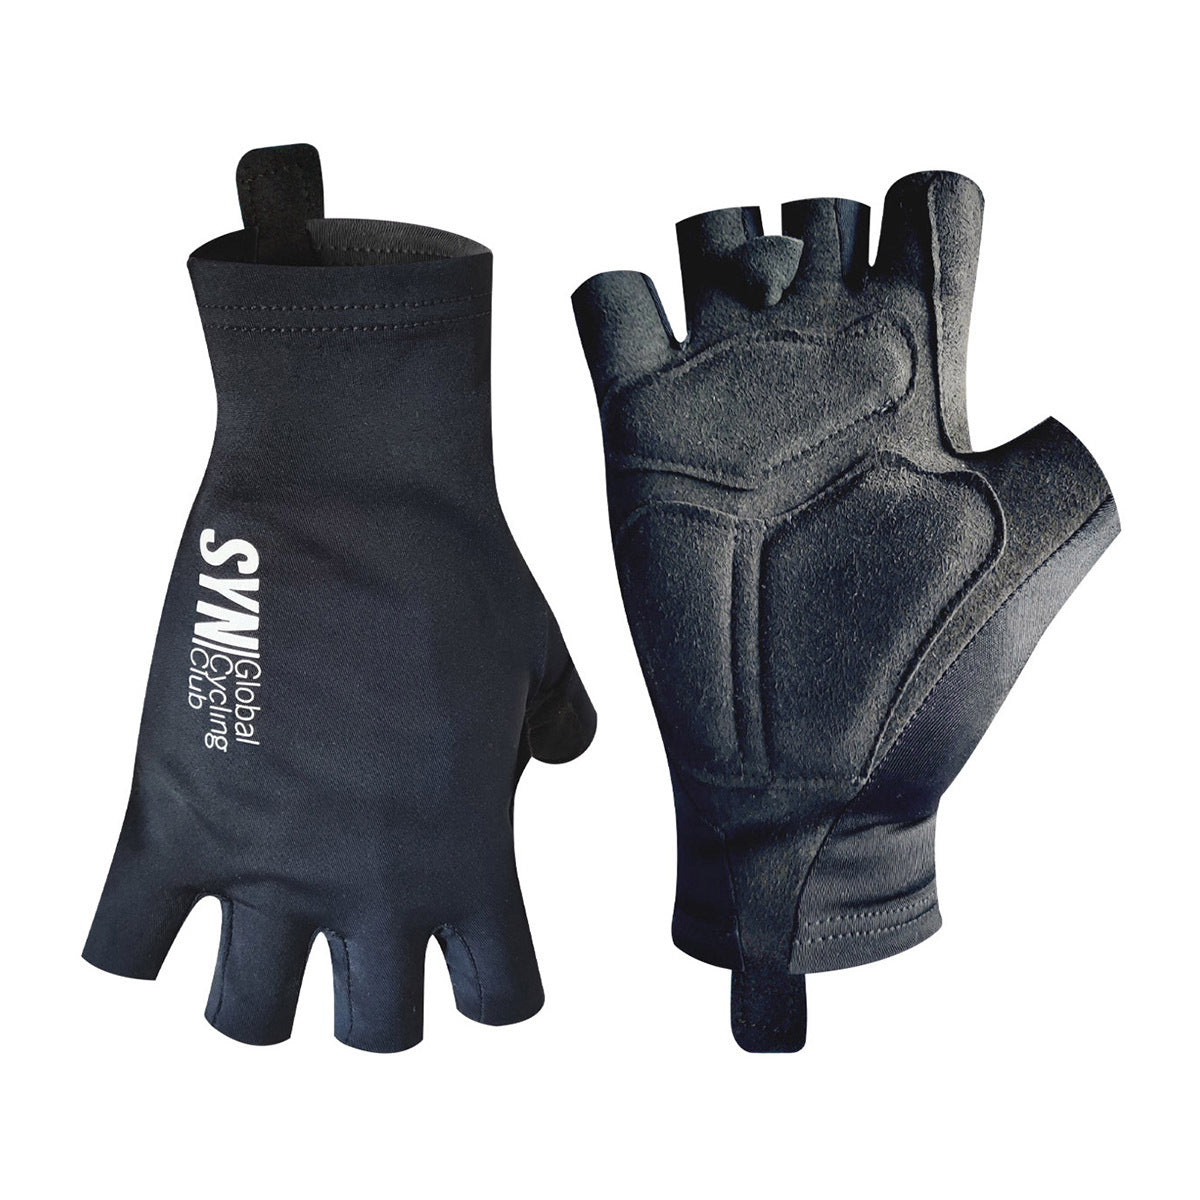 Syndicate Pro Gloves